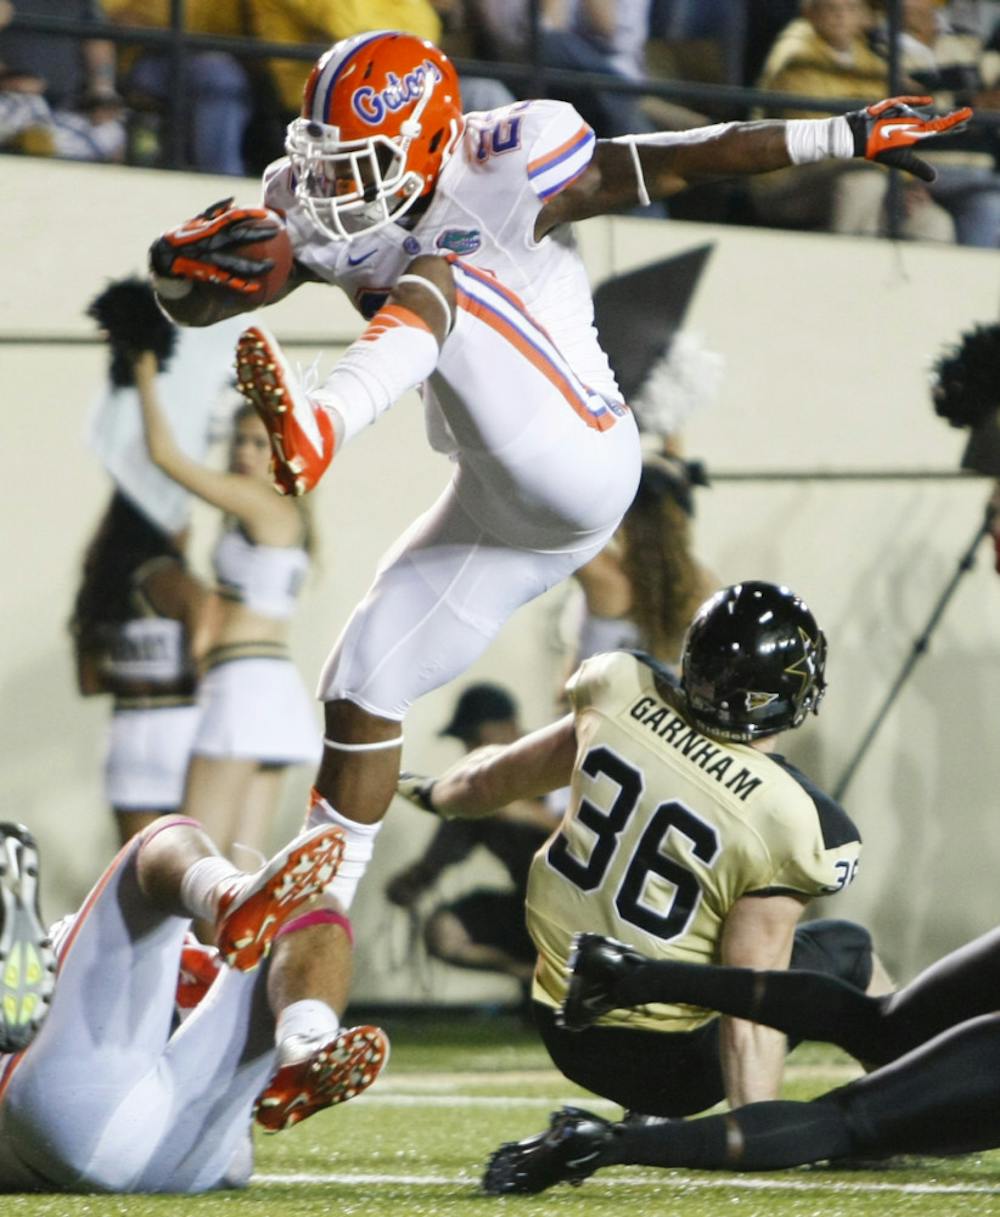 <p>Senior running back Mike Gillislee attempts to hurdle over a Vanderbilt defender during Florida's 31-17 win against Vanderbilt in Nashville, Tenn. Gillislee leads Southeastern Conference running backs in rushing yardage. South Carolina running back Marcus Lattimore tops the conference in rushing attempts with 129.</p>